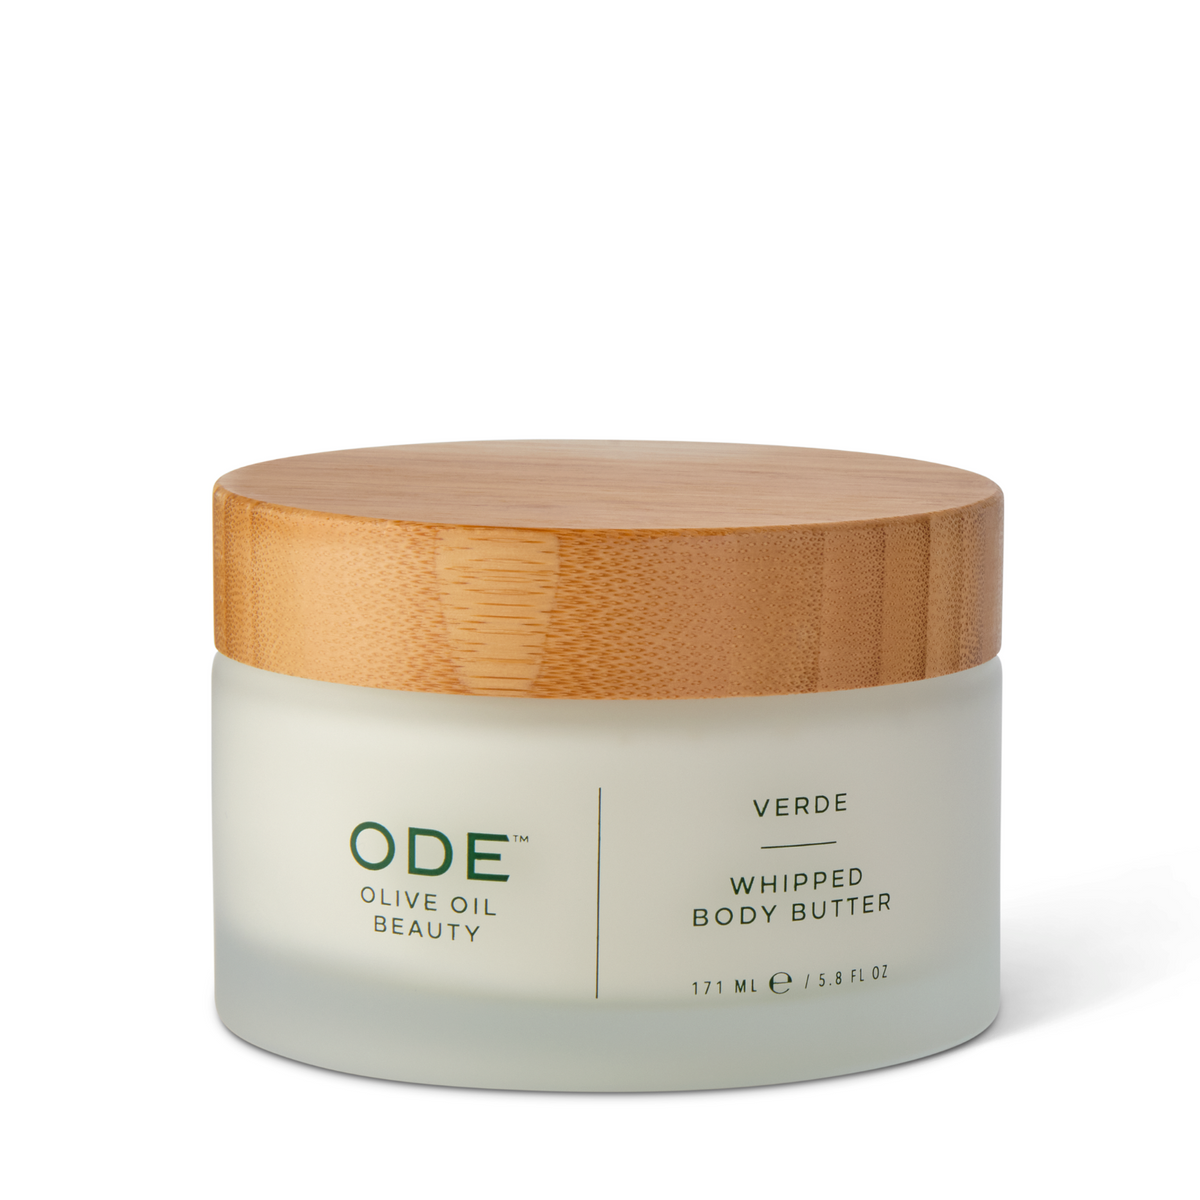 display_different_collection|ode-olive-oil-beauty-scents-verde